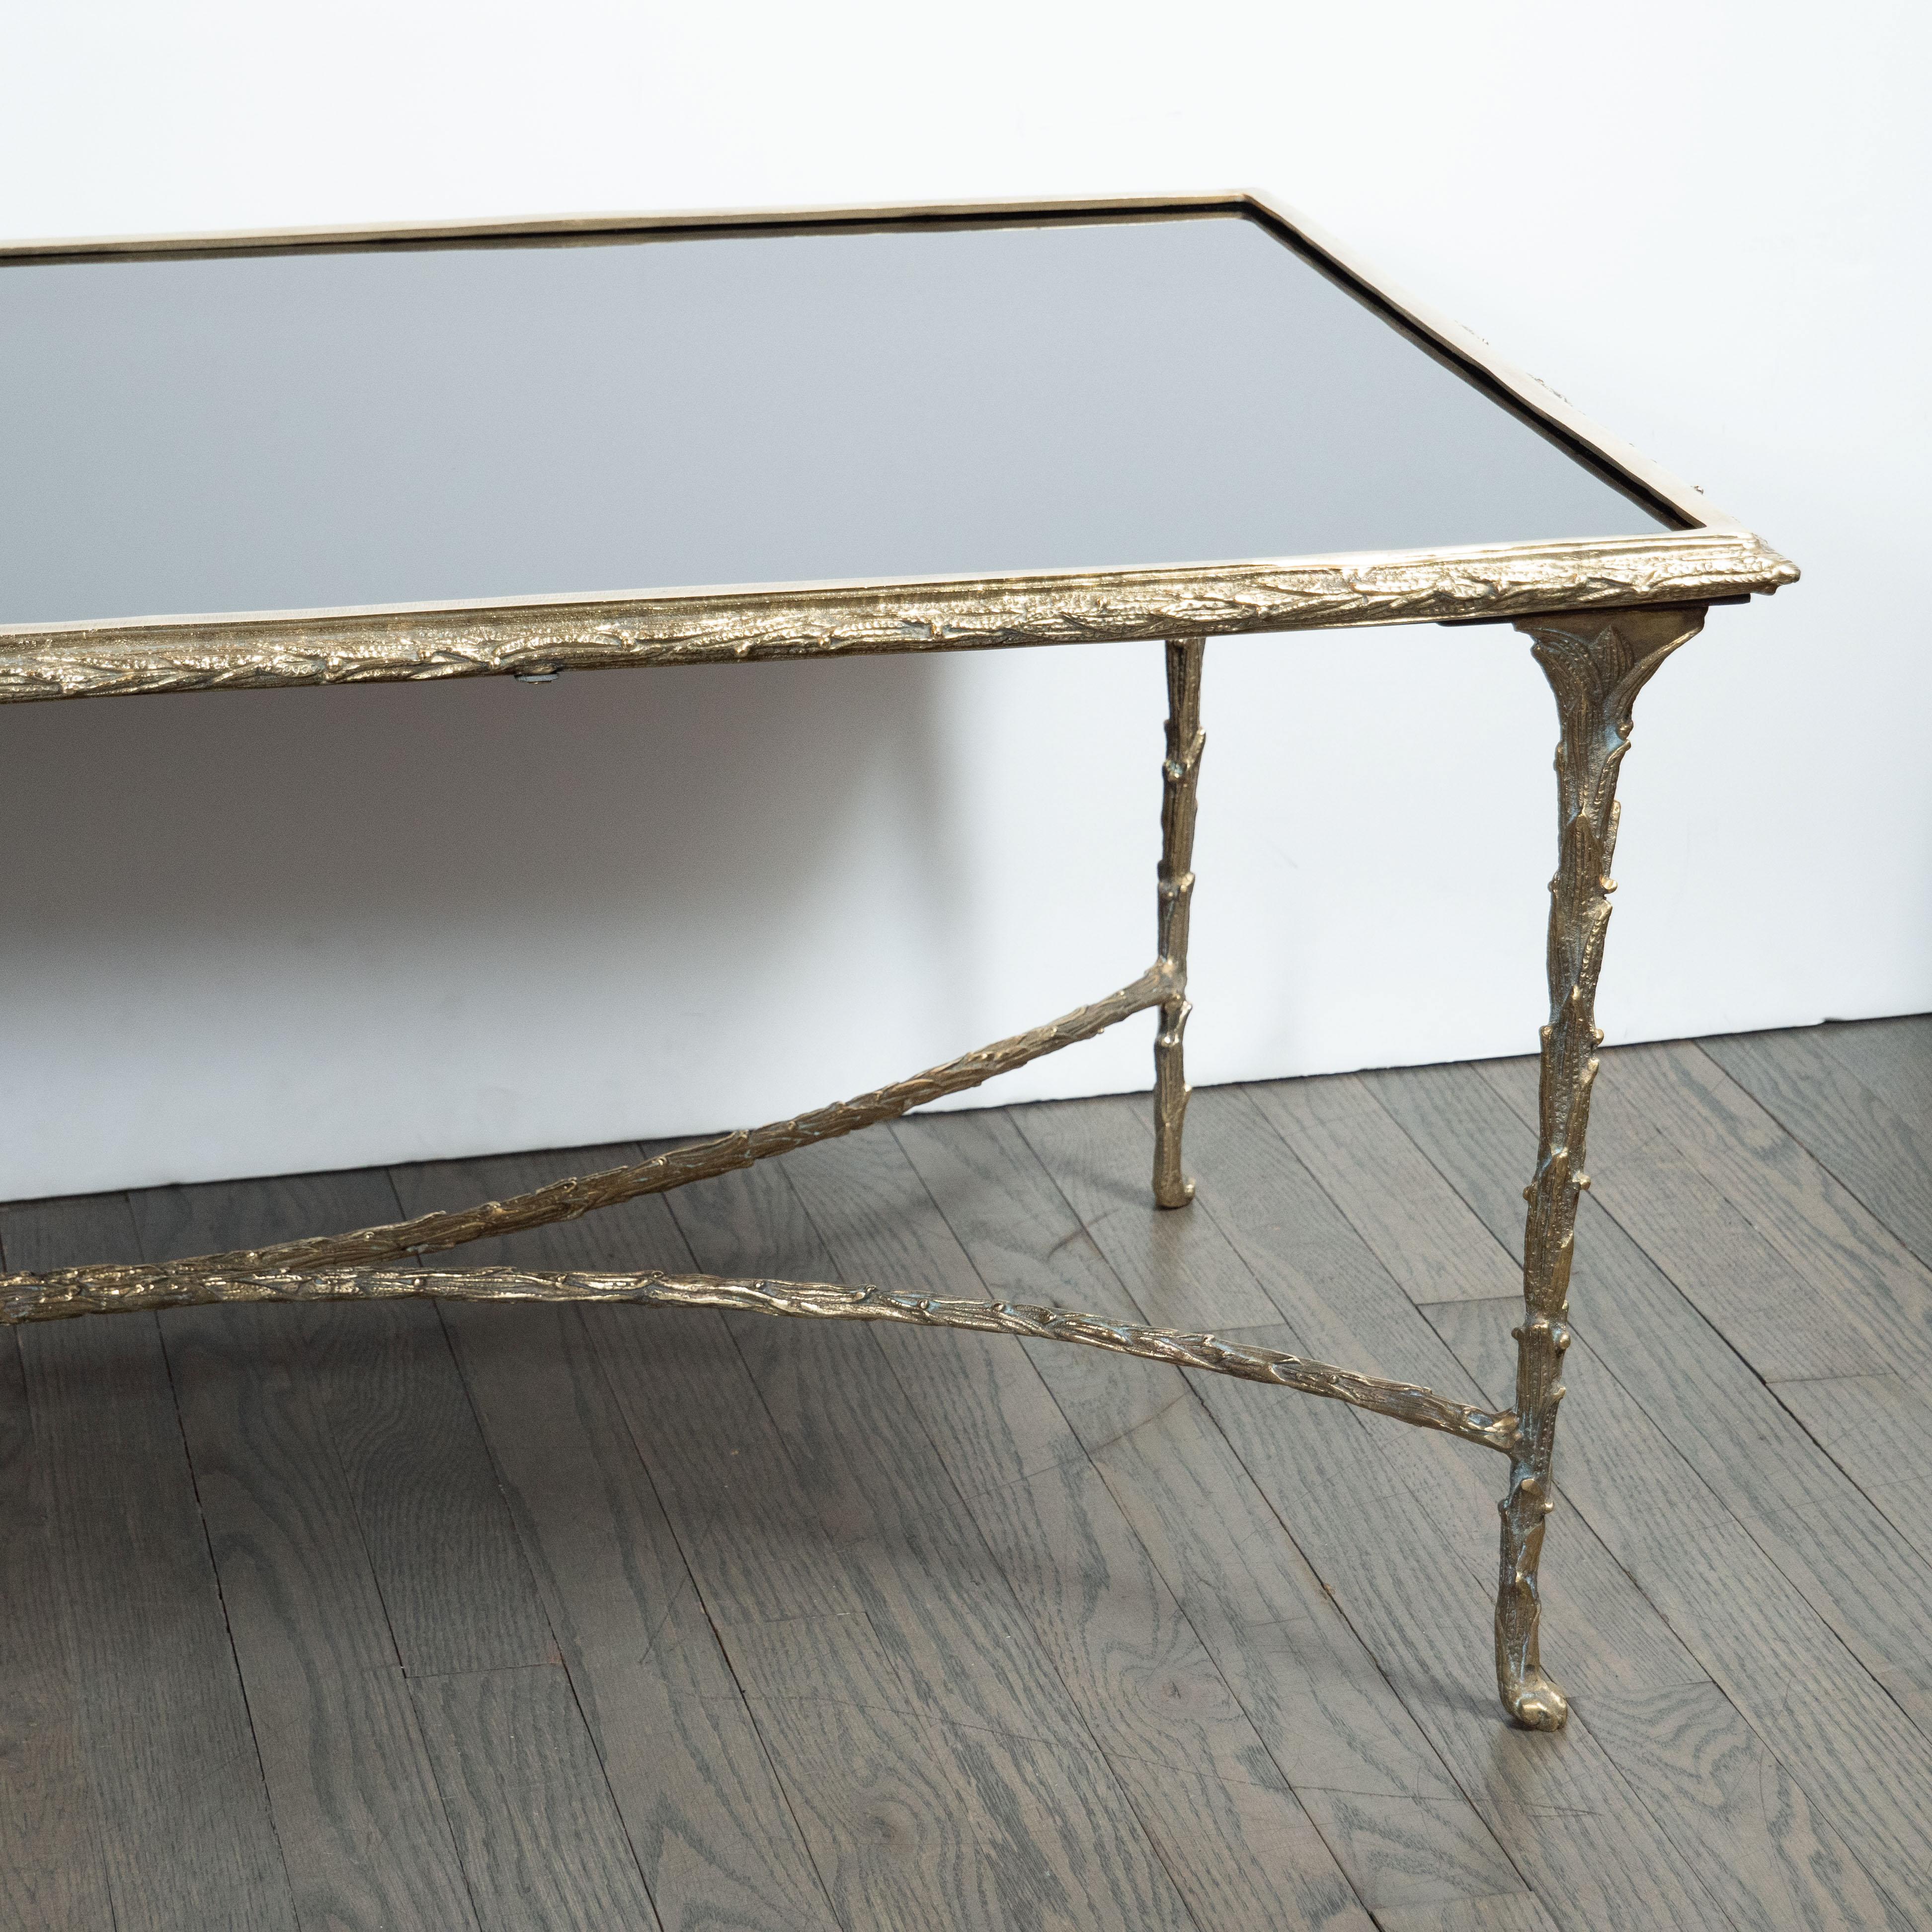 This elegant Mid-Century Modern cocktail table was realized by the esteemed French maker Bagues, circa 1950. It features a rectangular black vitrolite top sitting in a gilded bronze frame with dappled and sculptural foliate detailing engraved